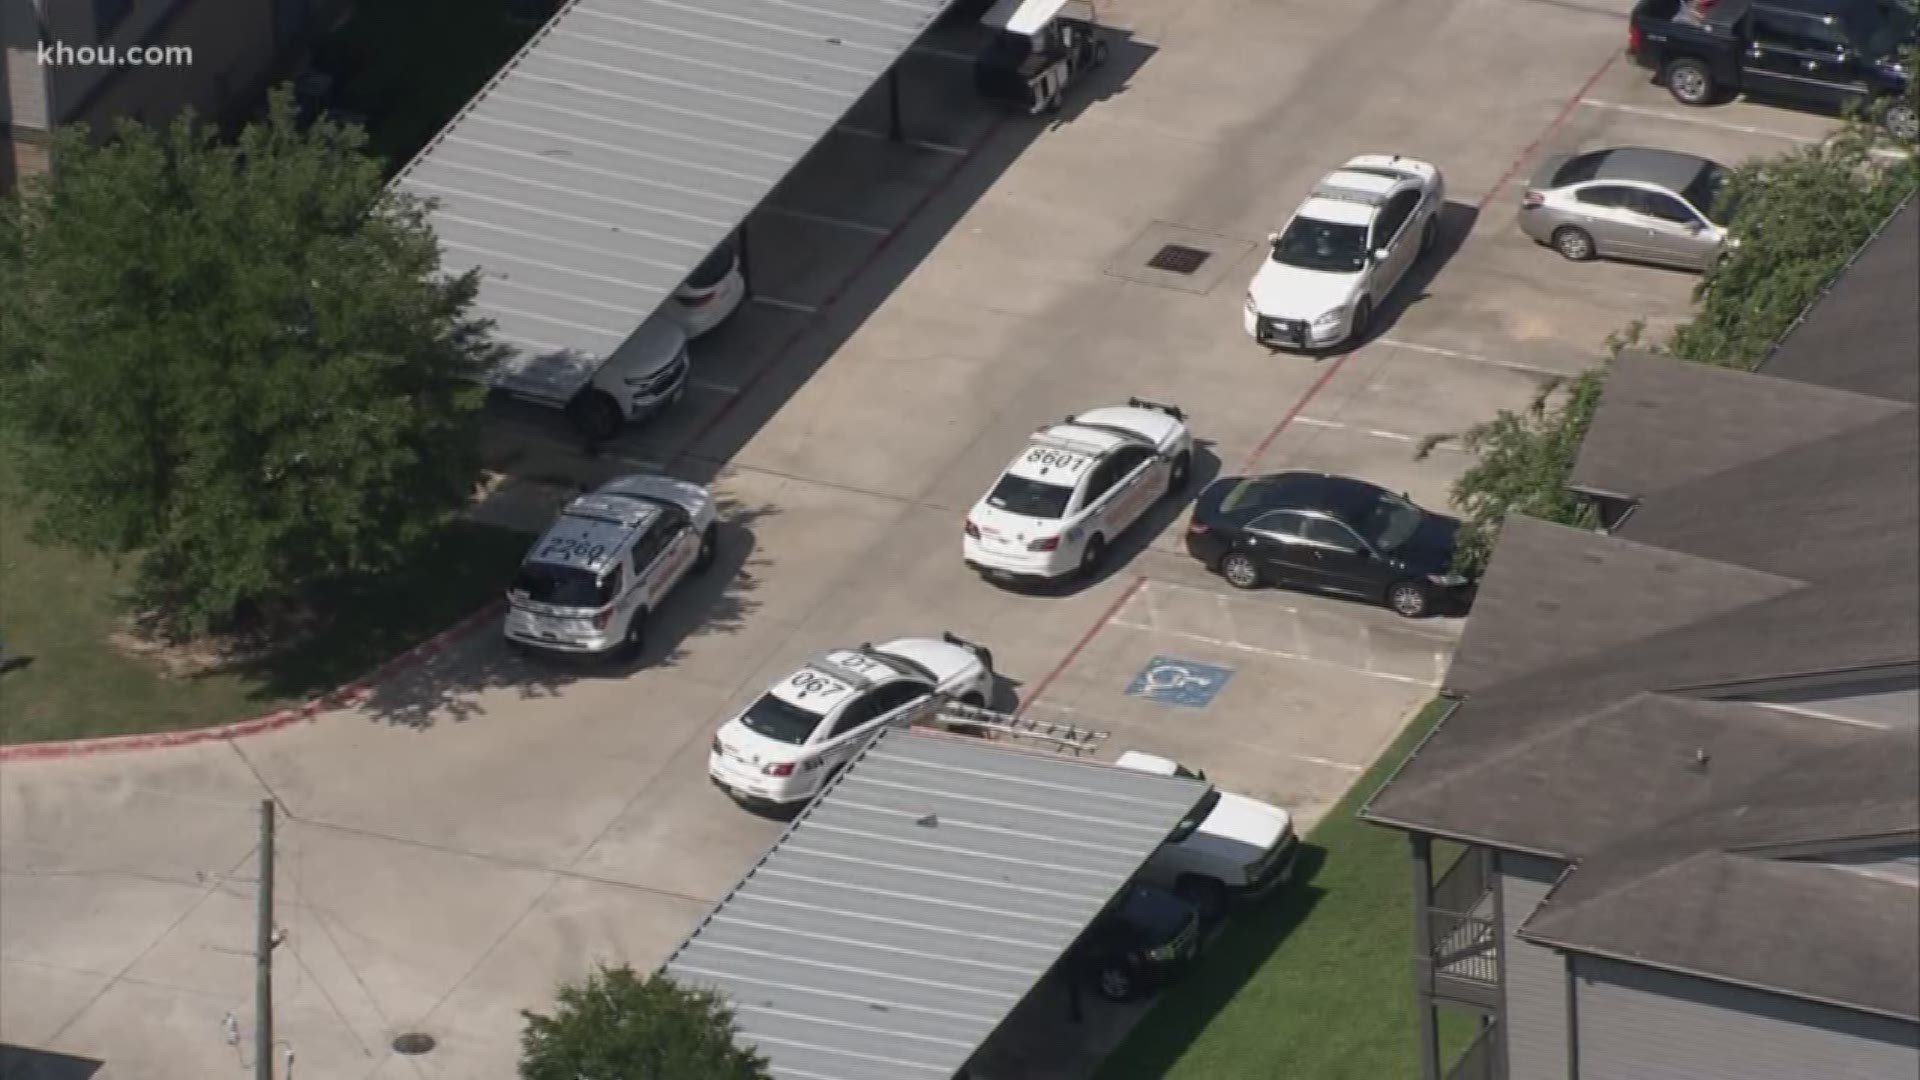 A 15-year-old is dead he was shot in an apartment when he and some friends were playing with a gun, according to the Harris County Sheriff's Office.